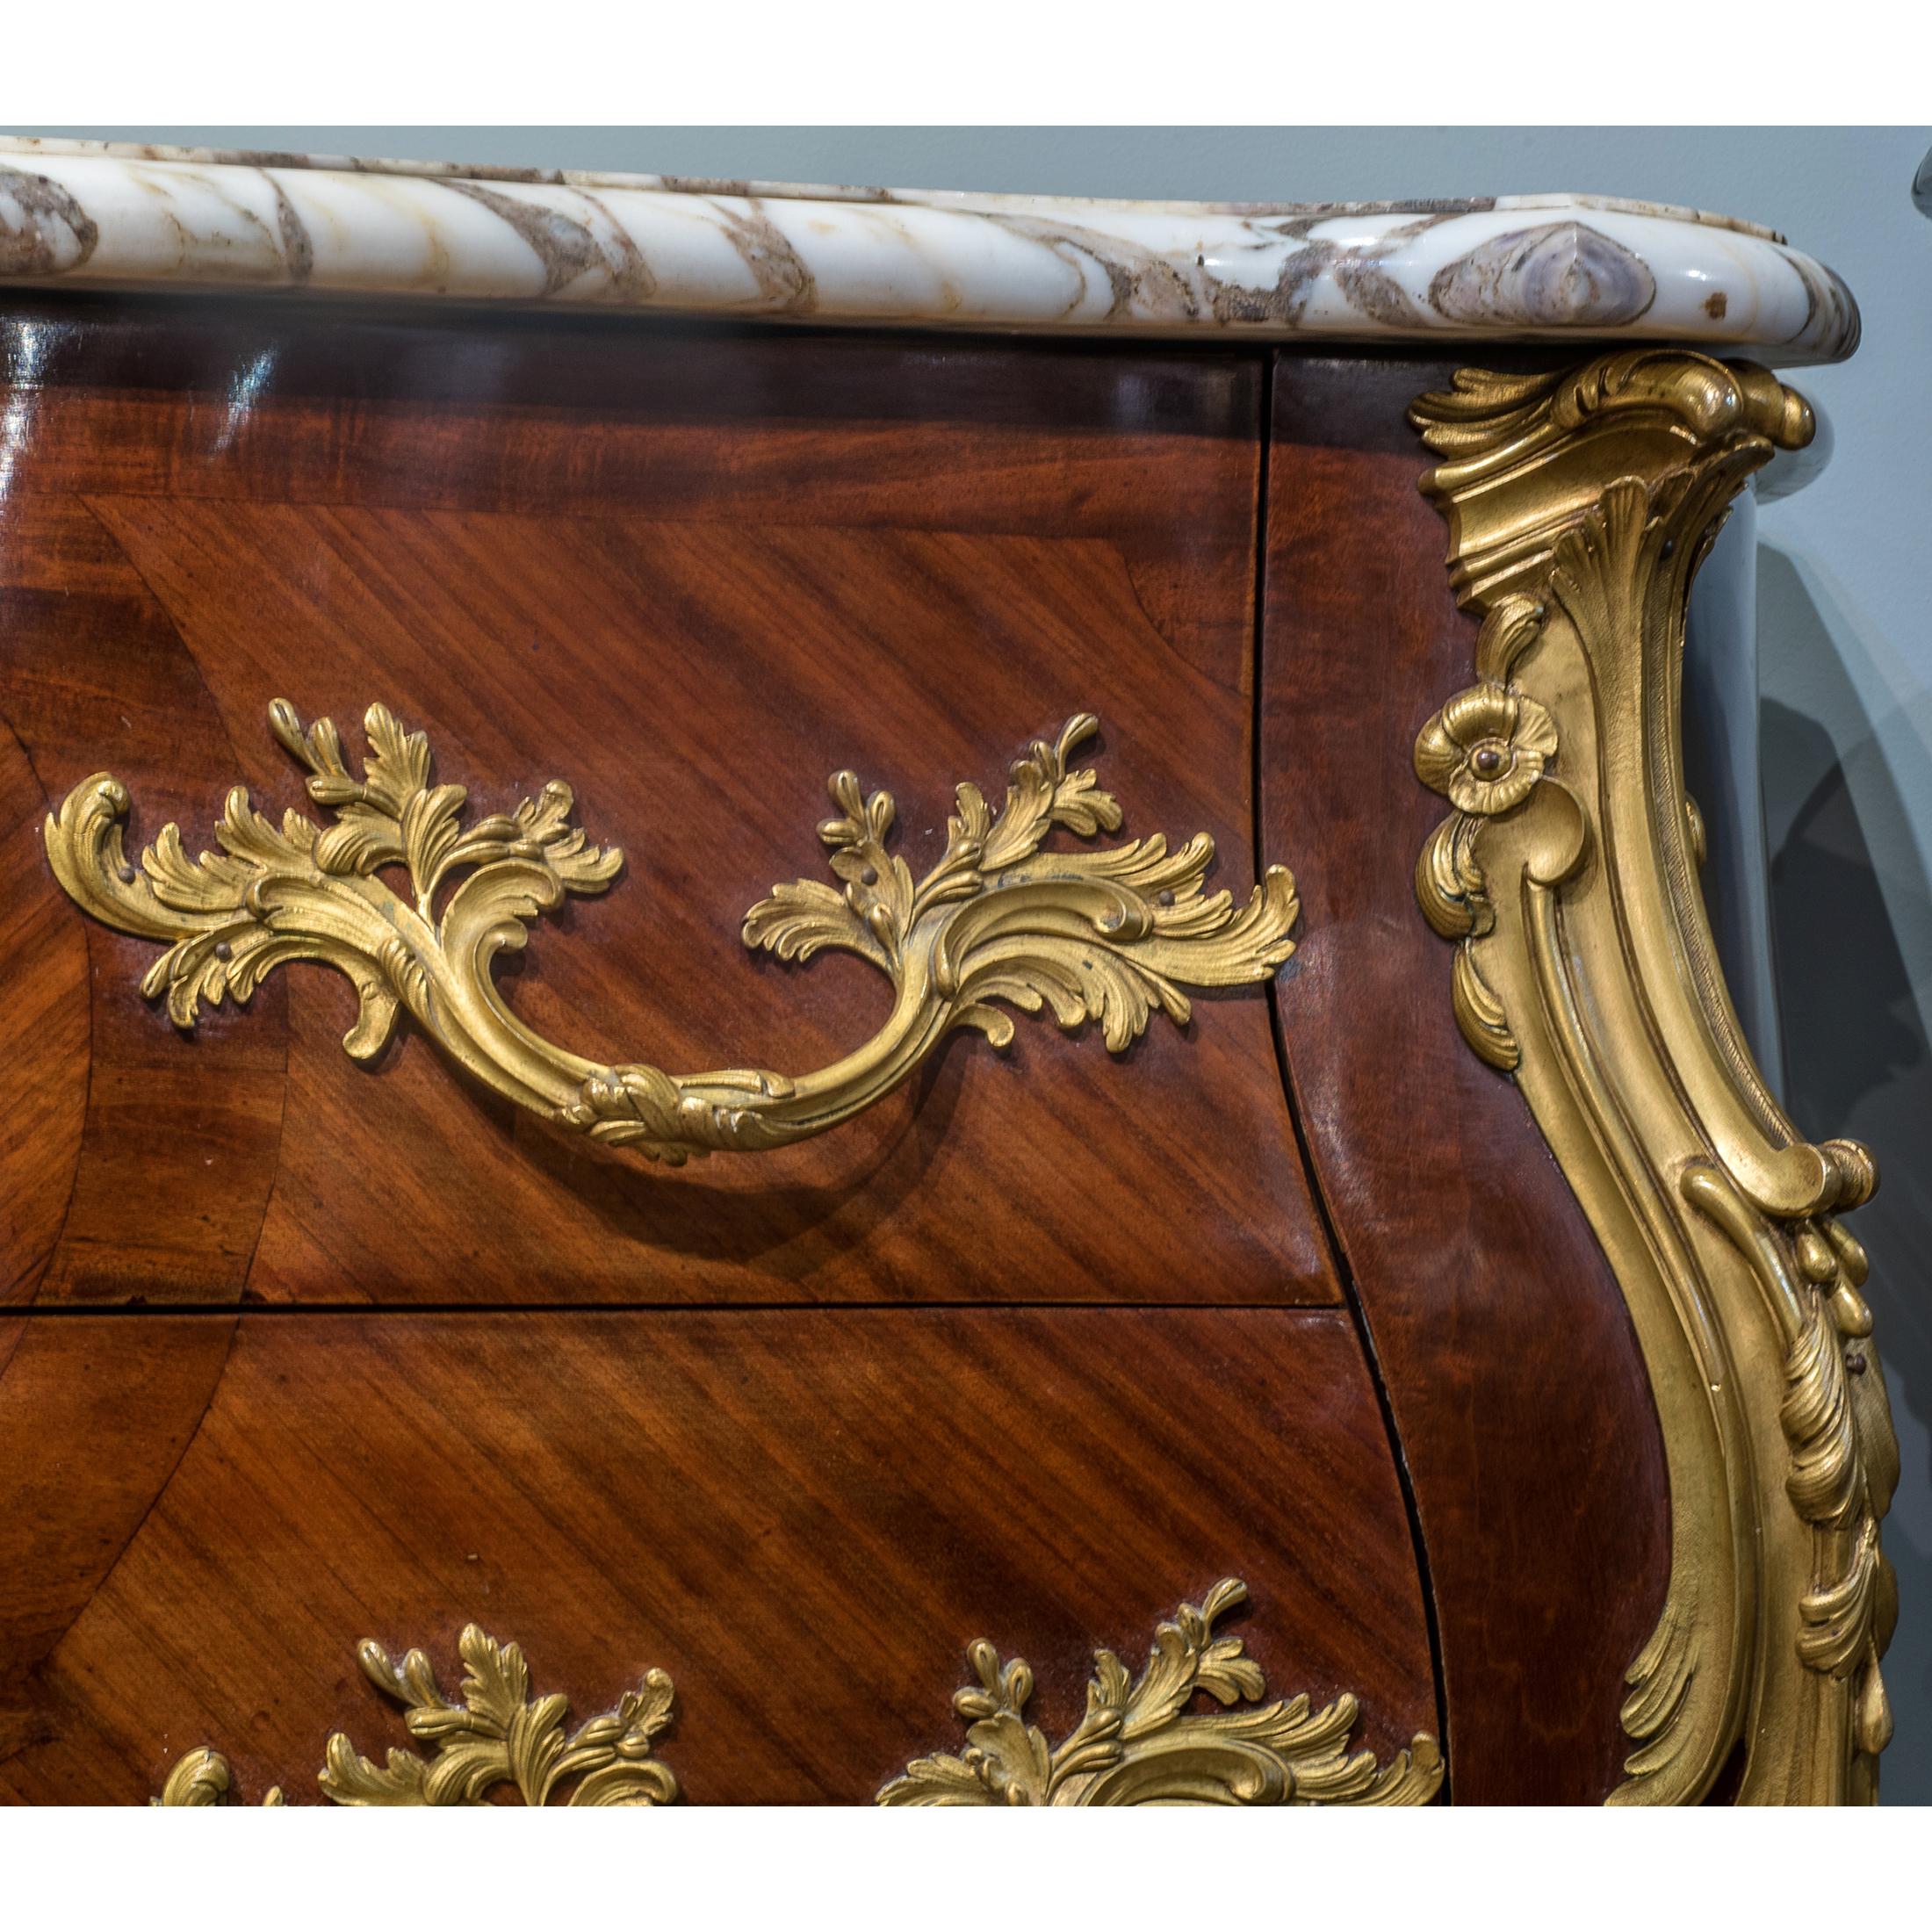  French Louis XV-Style Gilt Bronze Marble Top Mounted Commode For Sale 2